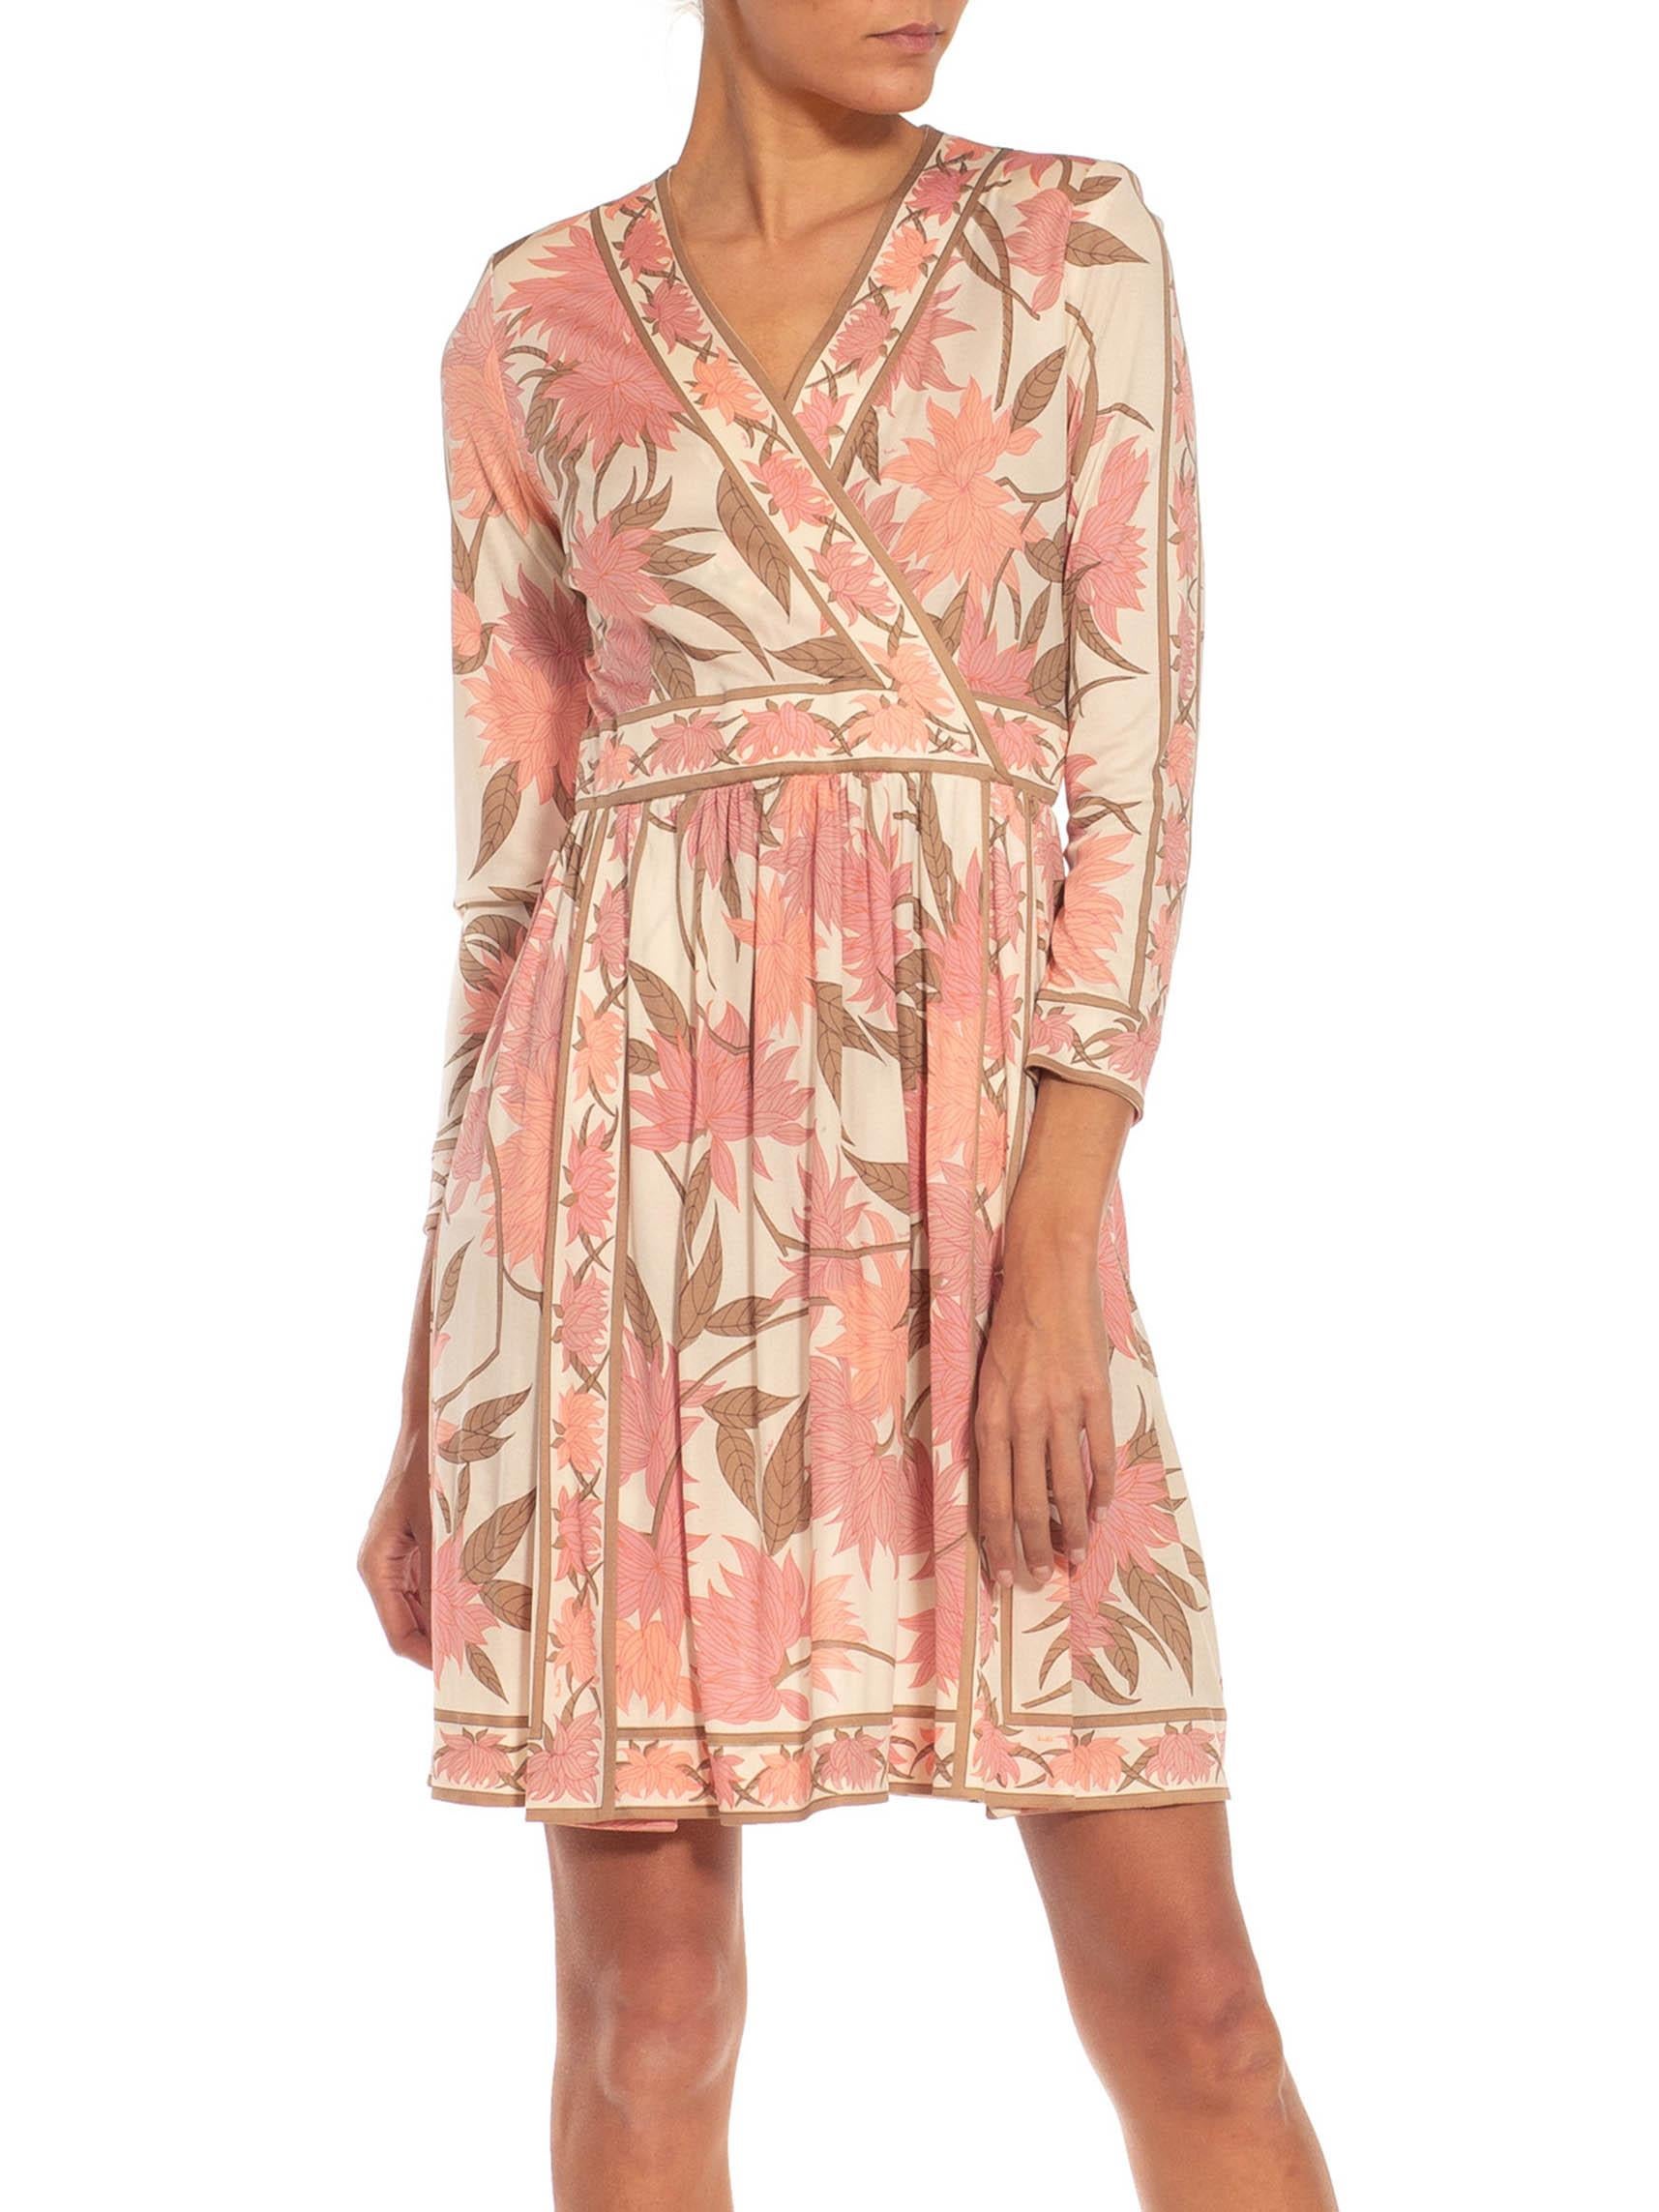 Women's 1970S EMILIO PUCCI Cream, Brown & Pink Floral Silk Rayon Blend Signed Dress For Sale